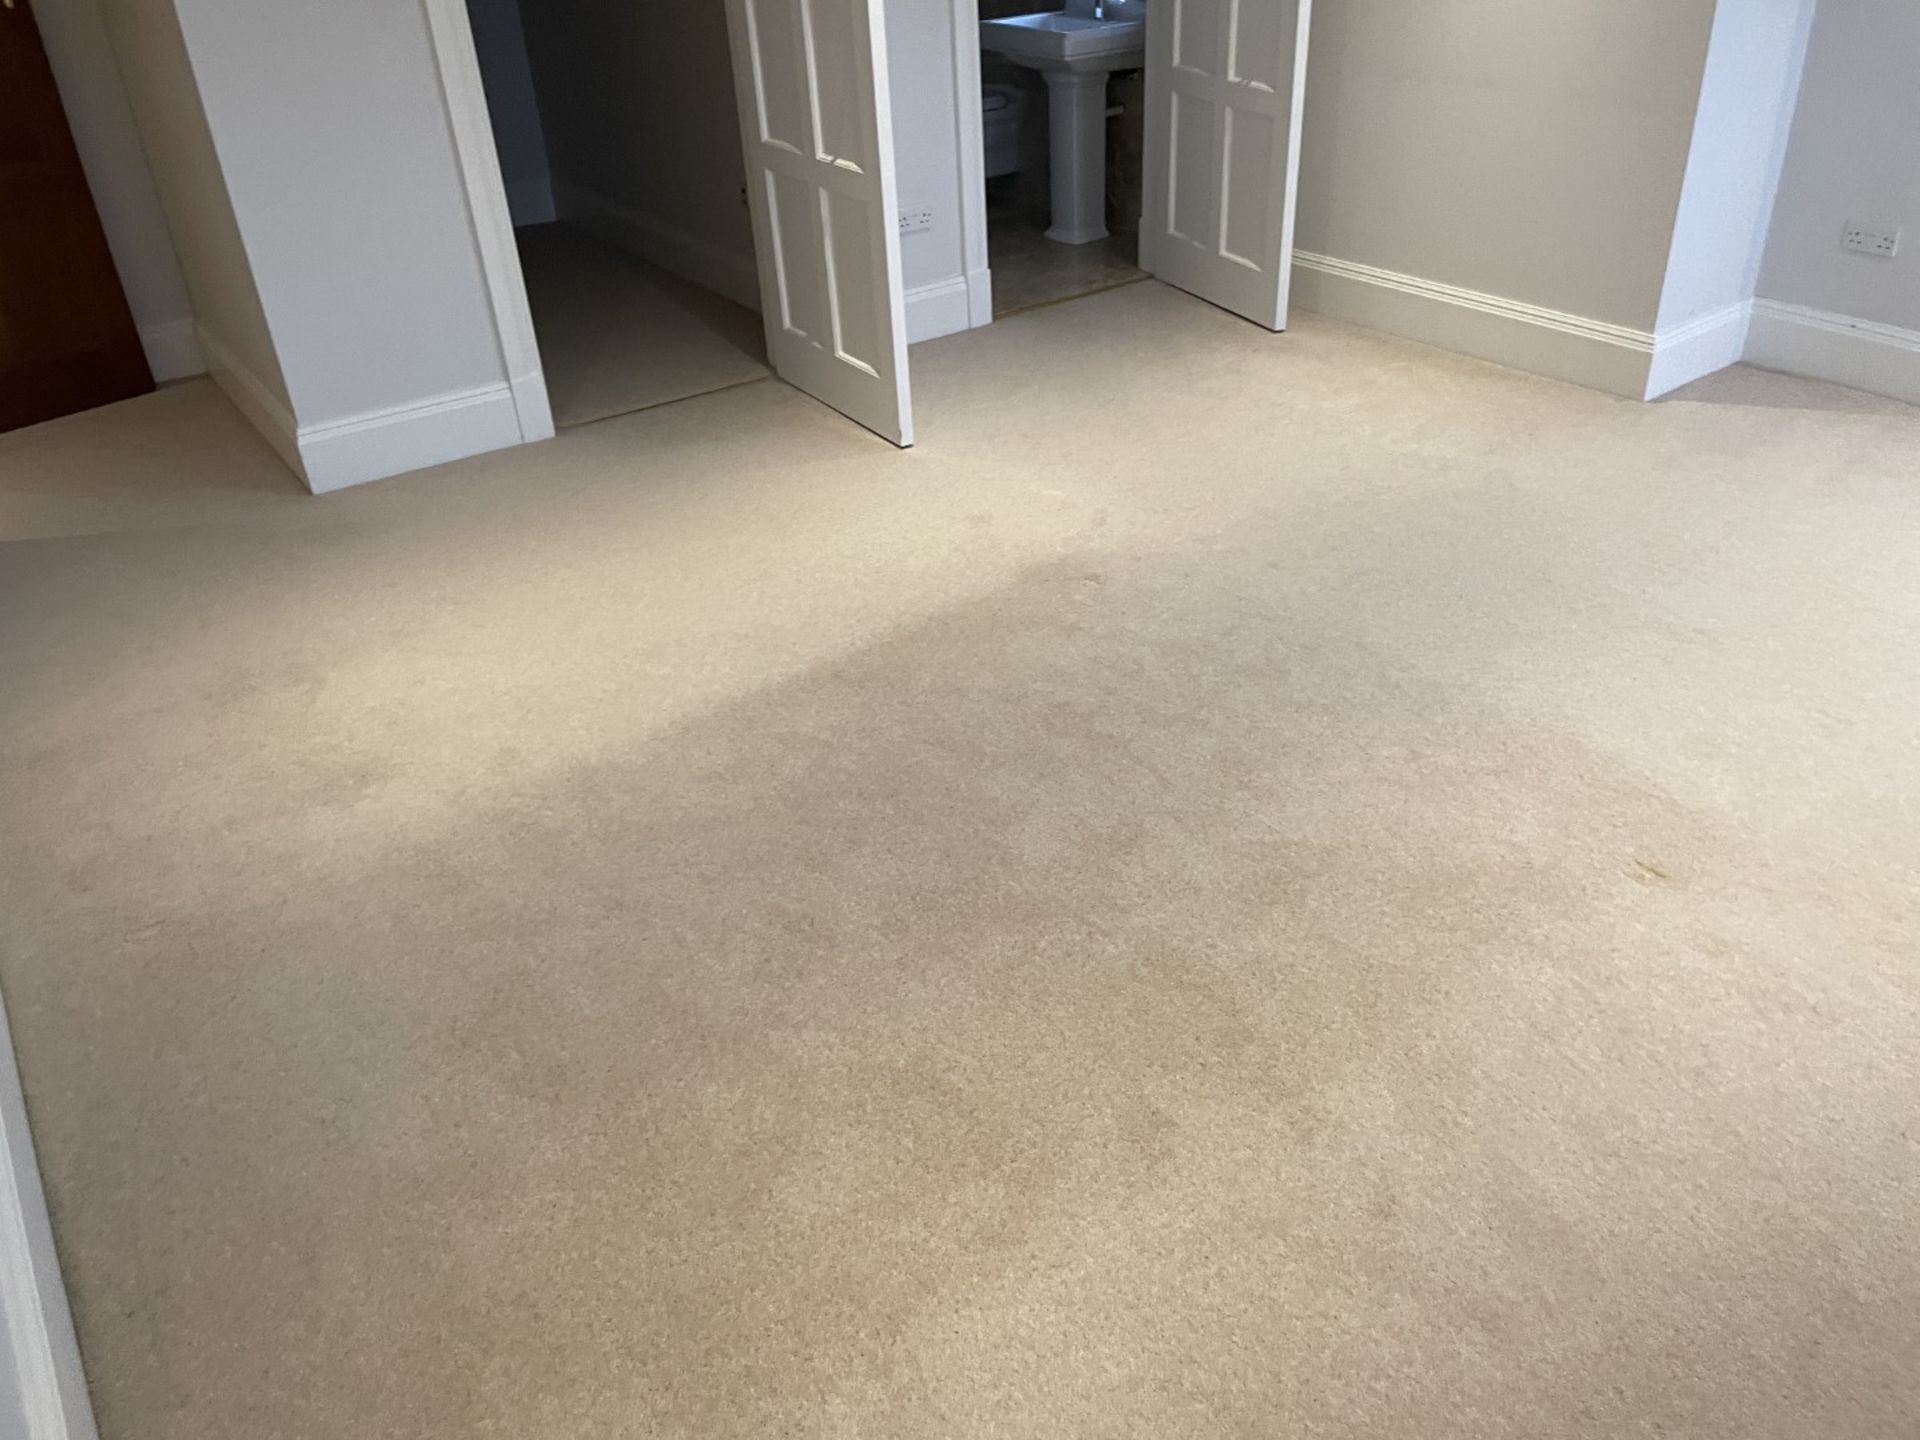 1 x Luxury Wool Back Bedroom Carpet in a Neutral Tone with Premium Underlay - Image 2 of 16